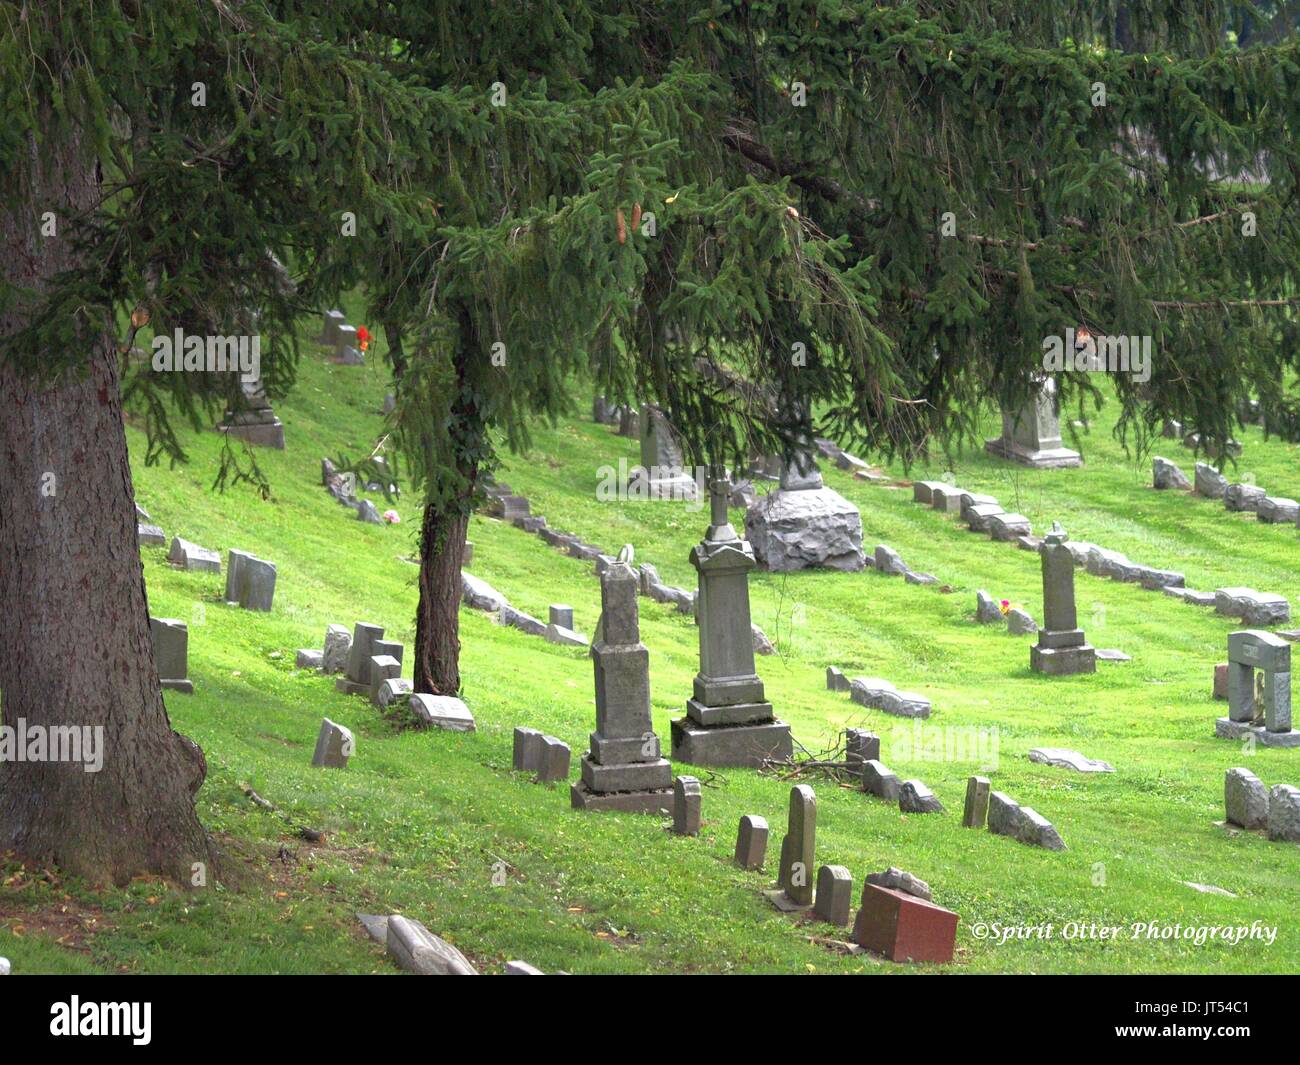 An older peaceful resting place of the dead, no names shown Stock Photo